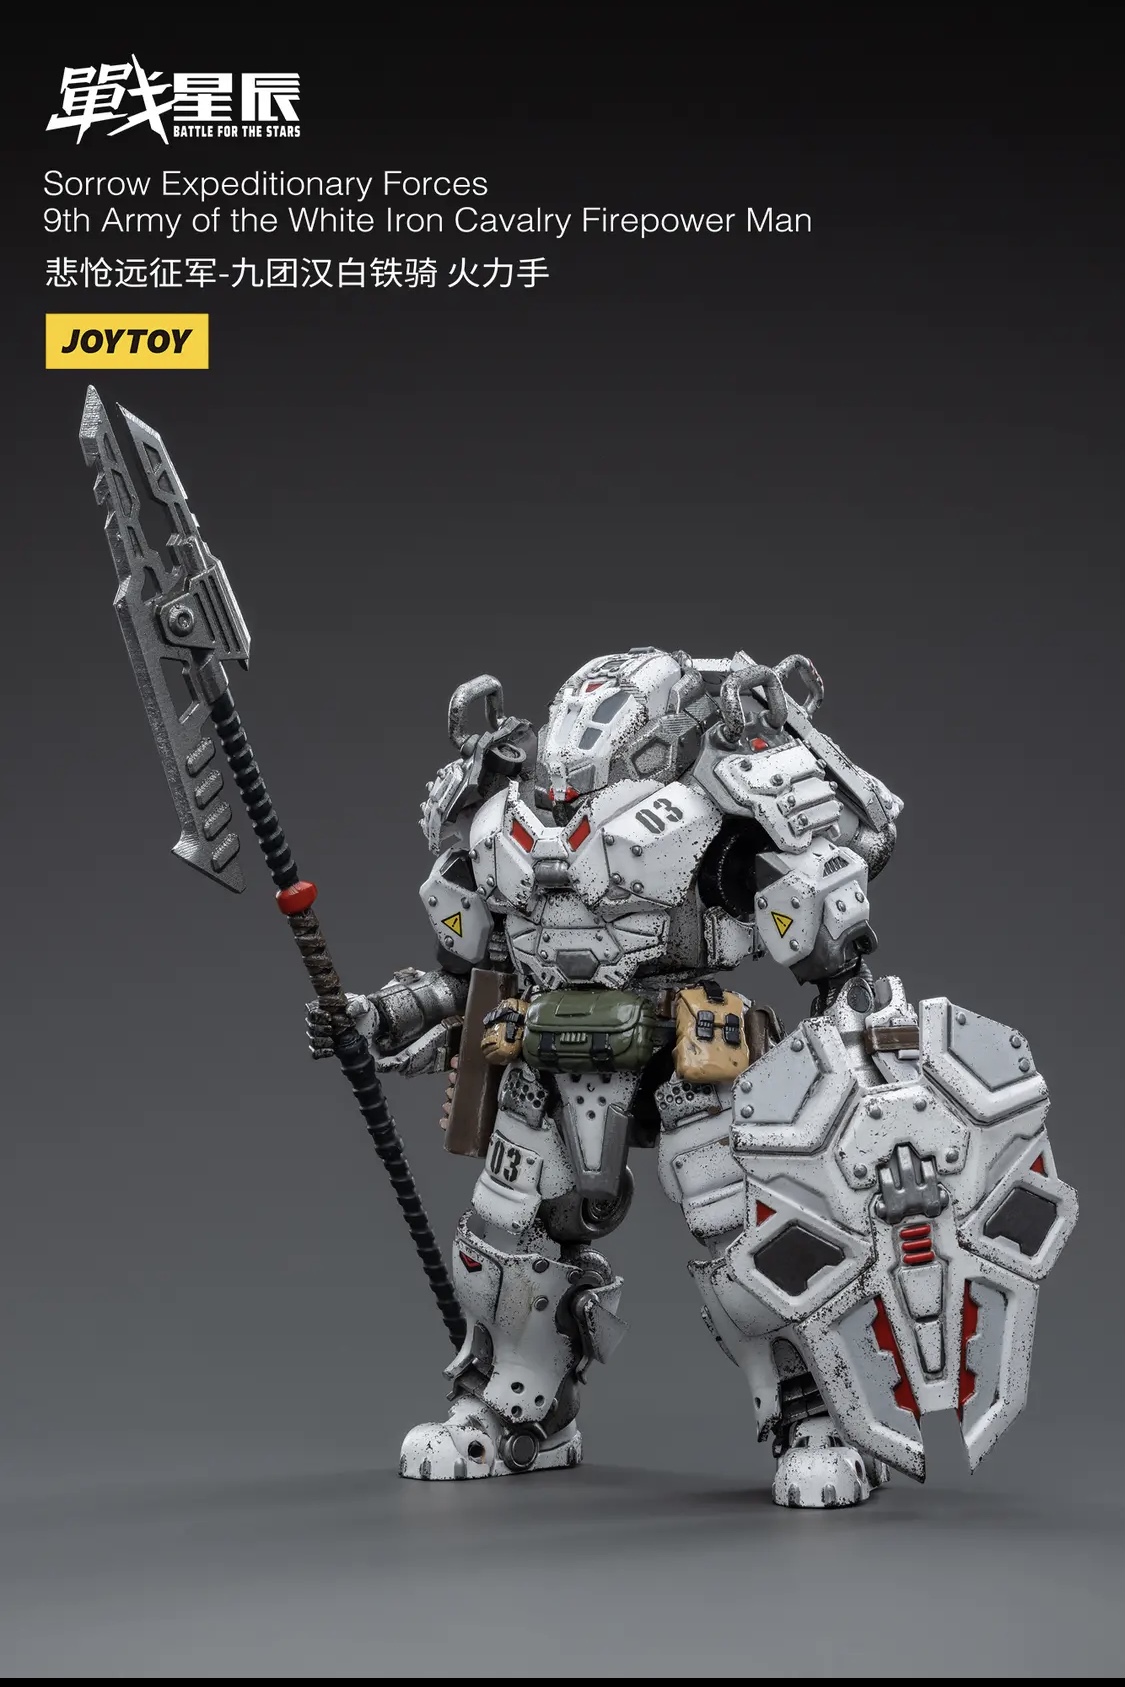 JOYTOY 1/18 Sorrow Expeditionary Forces 9th army of the White Iron Cavalry Firepower Man 